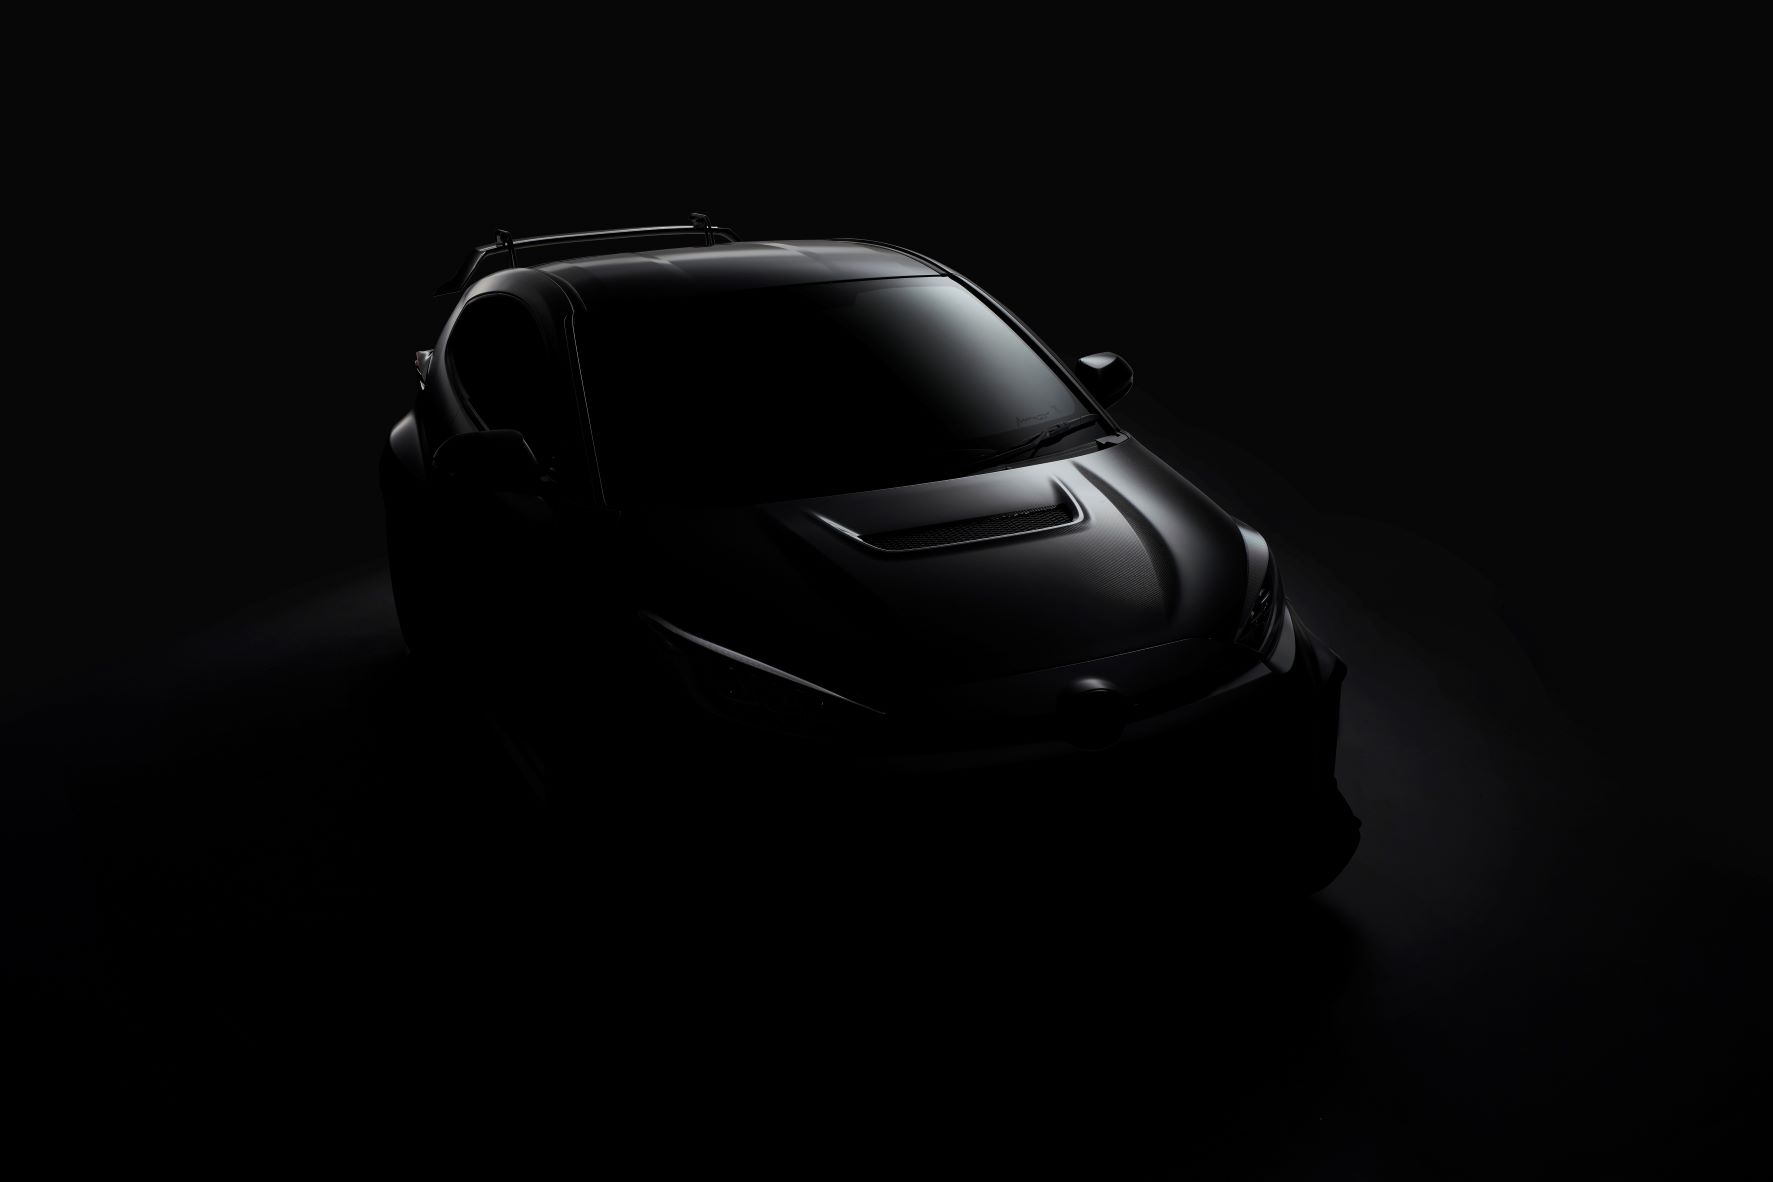 Teaser photo of Toyota's fully tuned GR Yaris